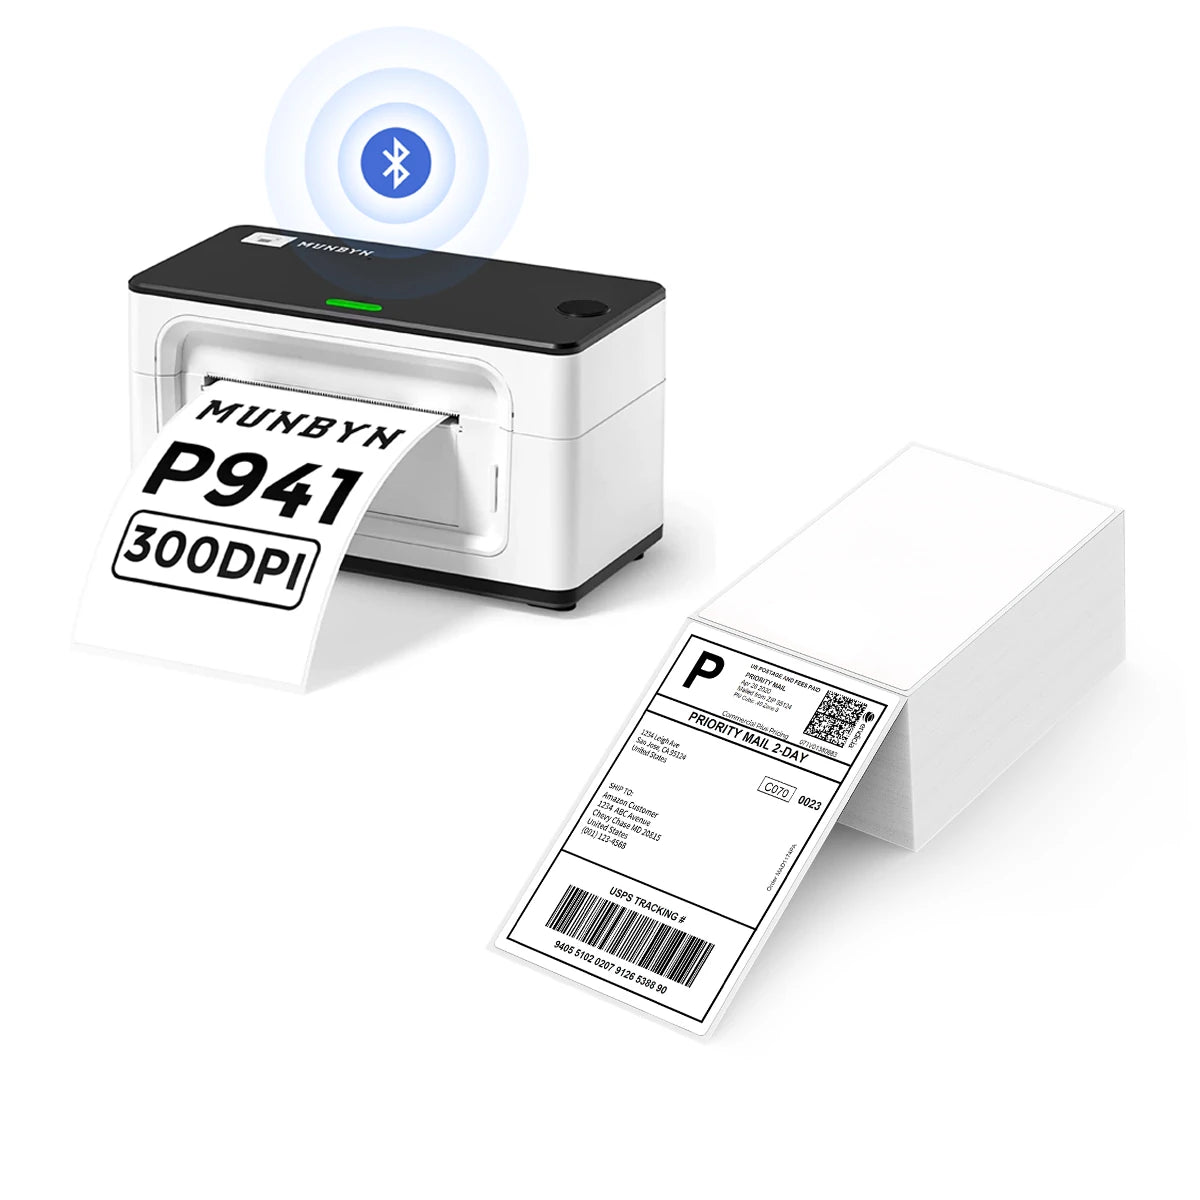 The MUNBYN 941B white Bluetooth label printer kit comes with a printer and a stack of shipping labels.